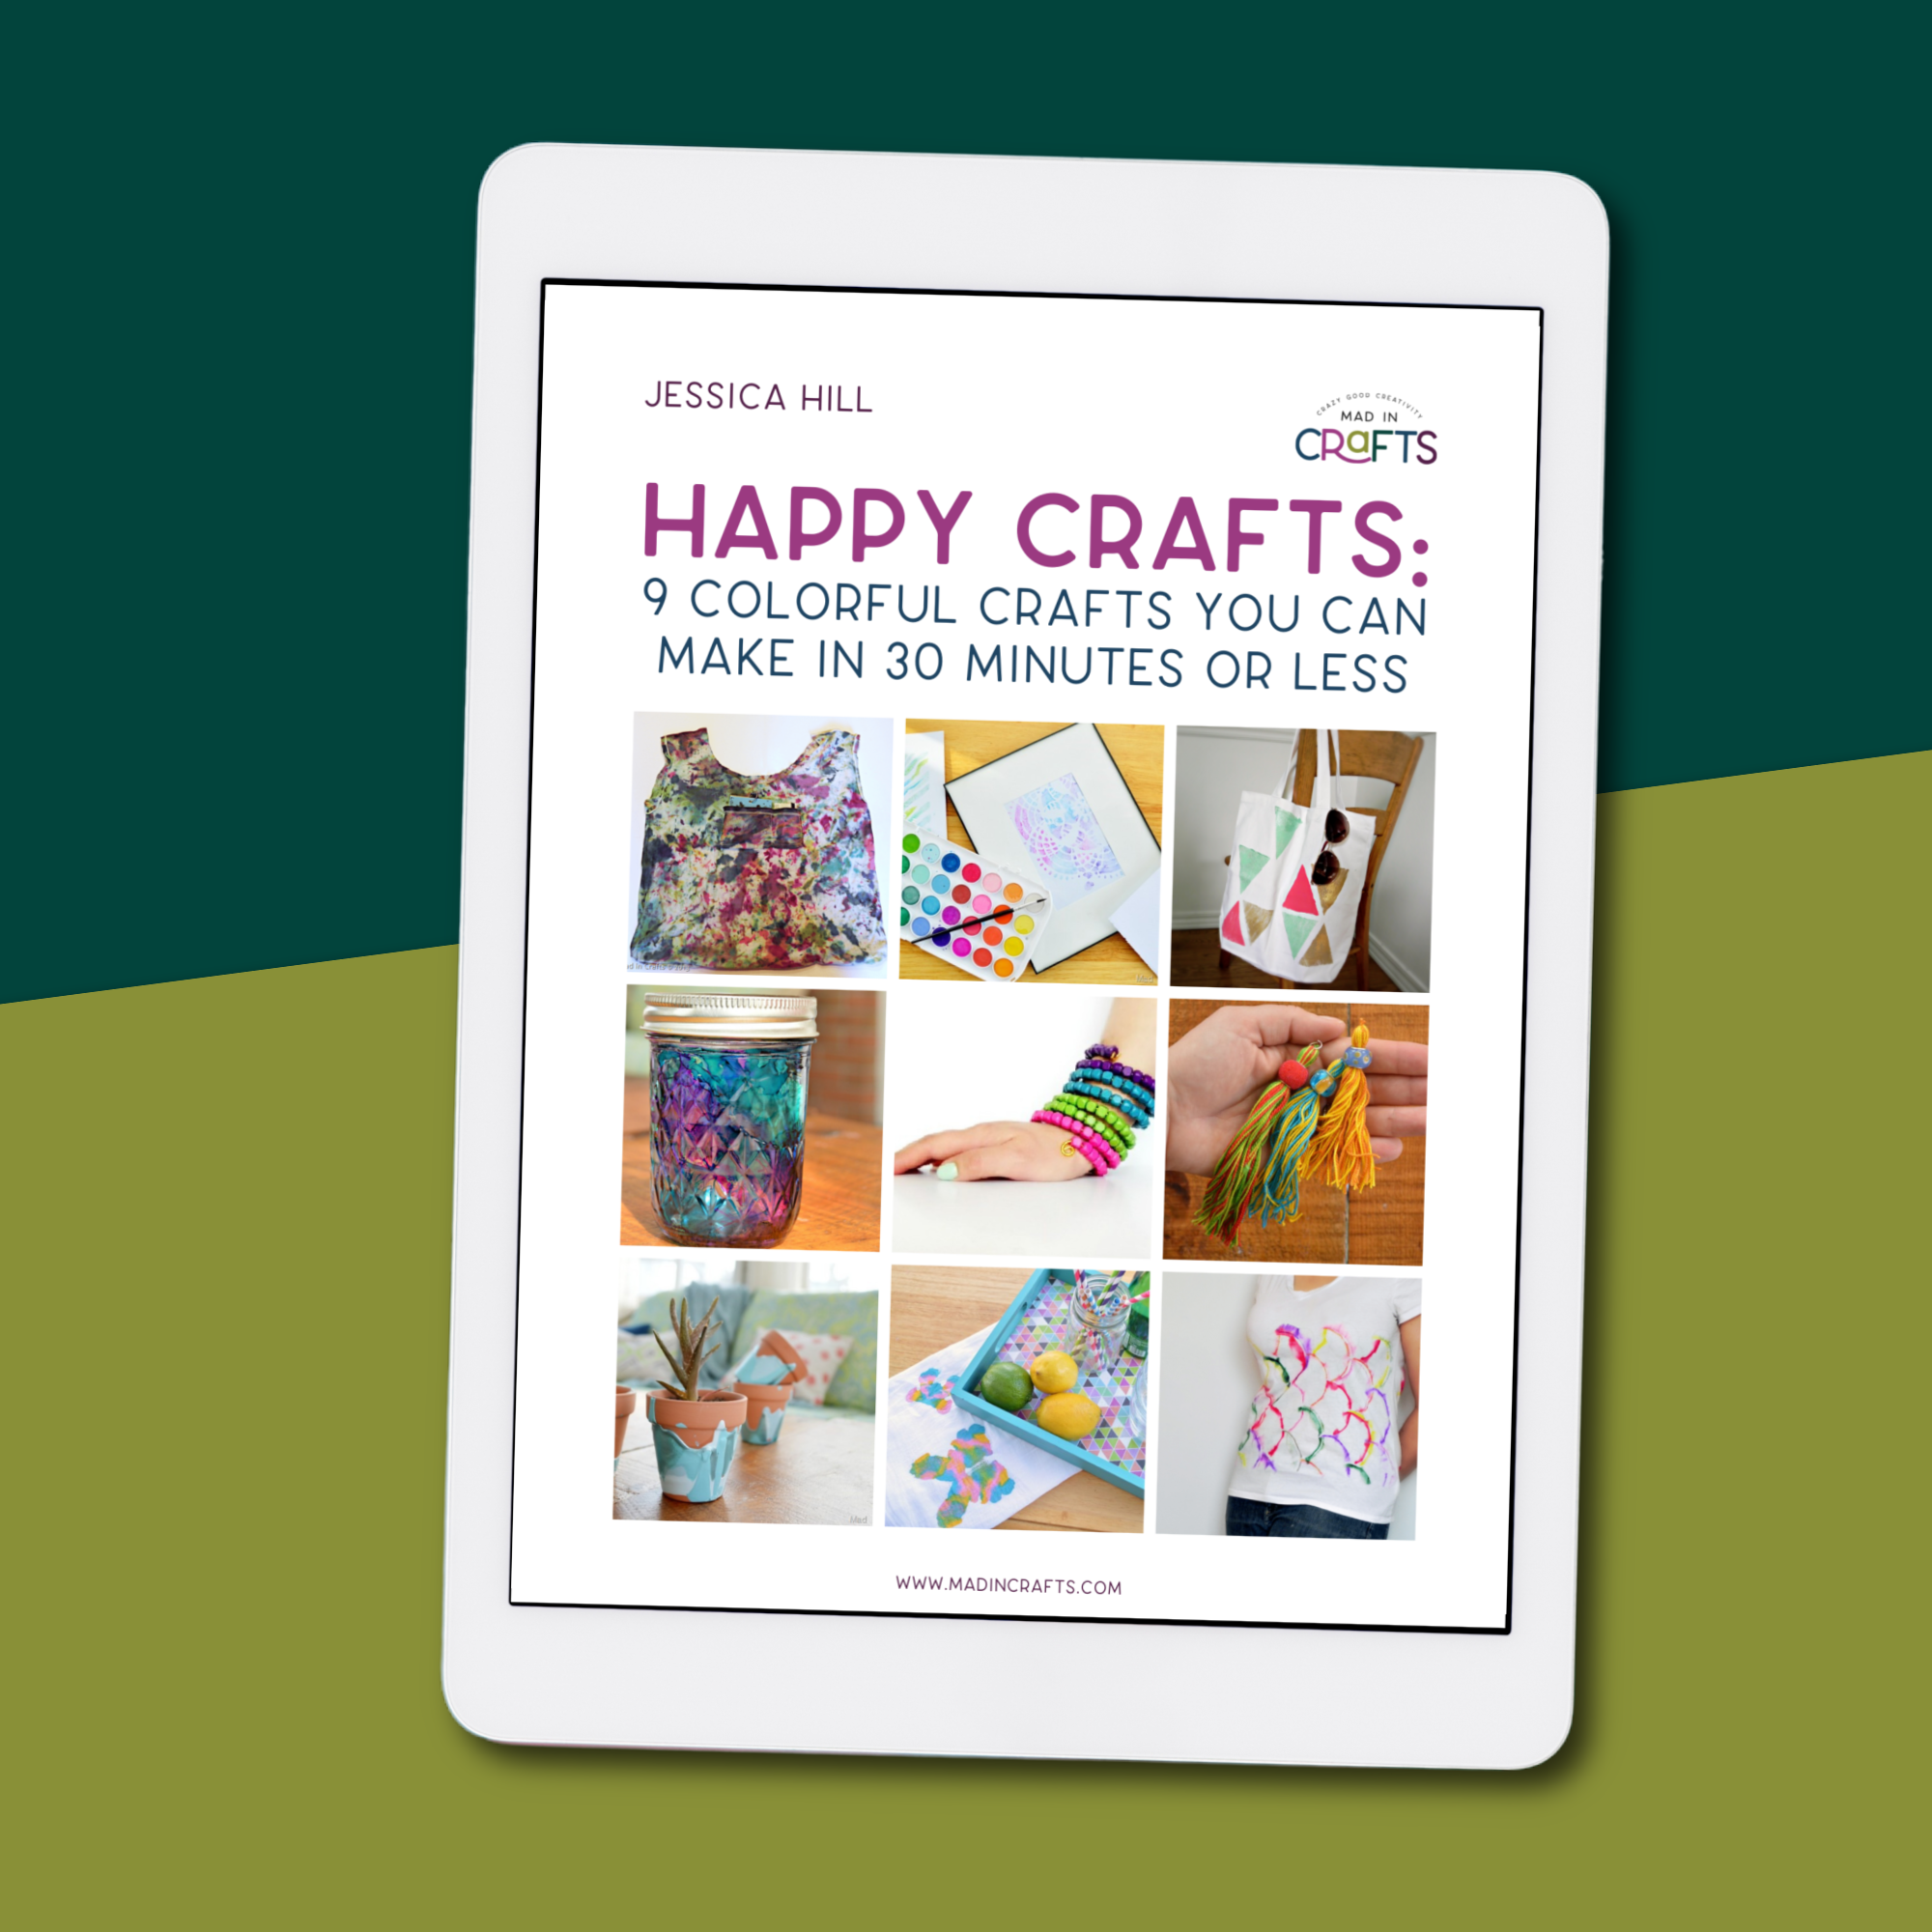 Happy Crafts: 9 Colorful Crafts You Can Make in 30 Minutes or Less